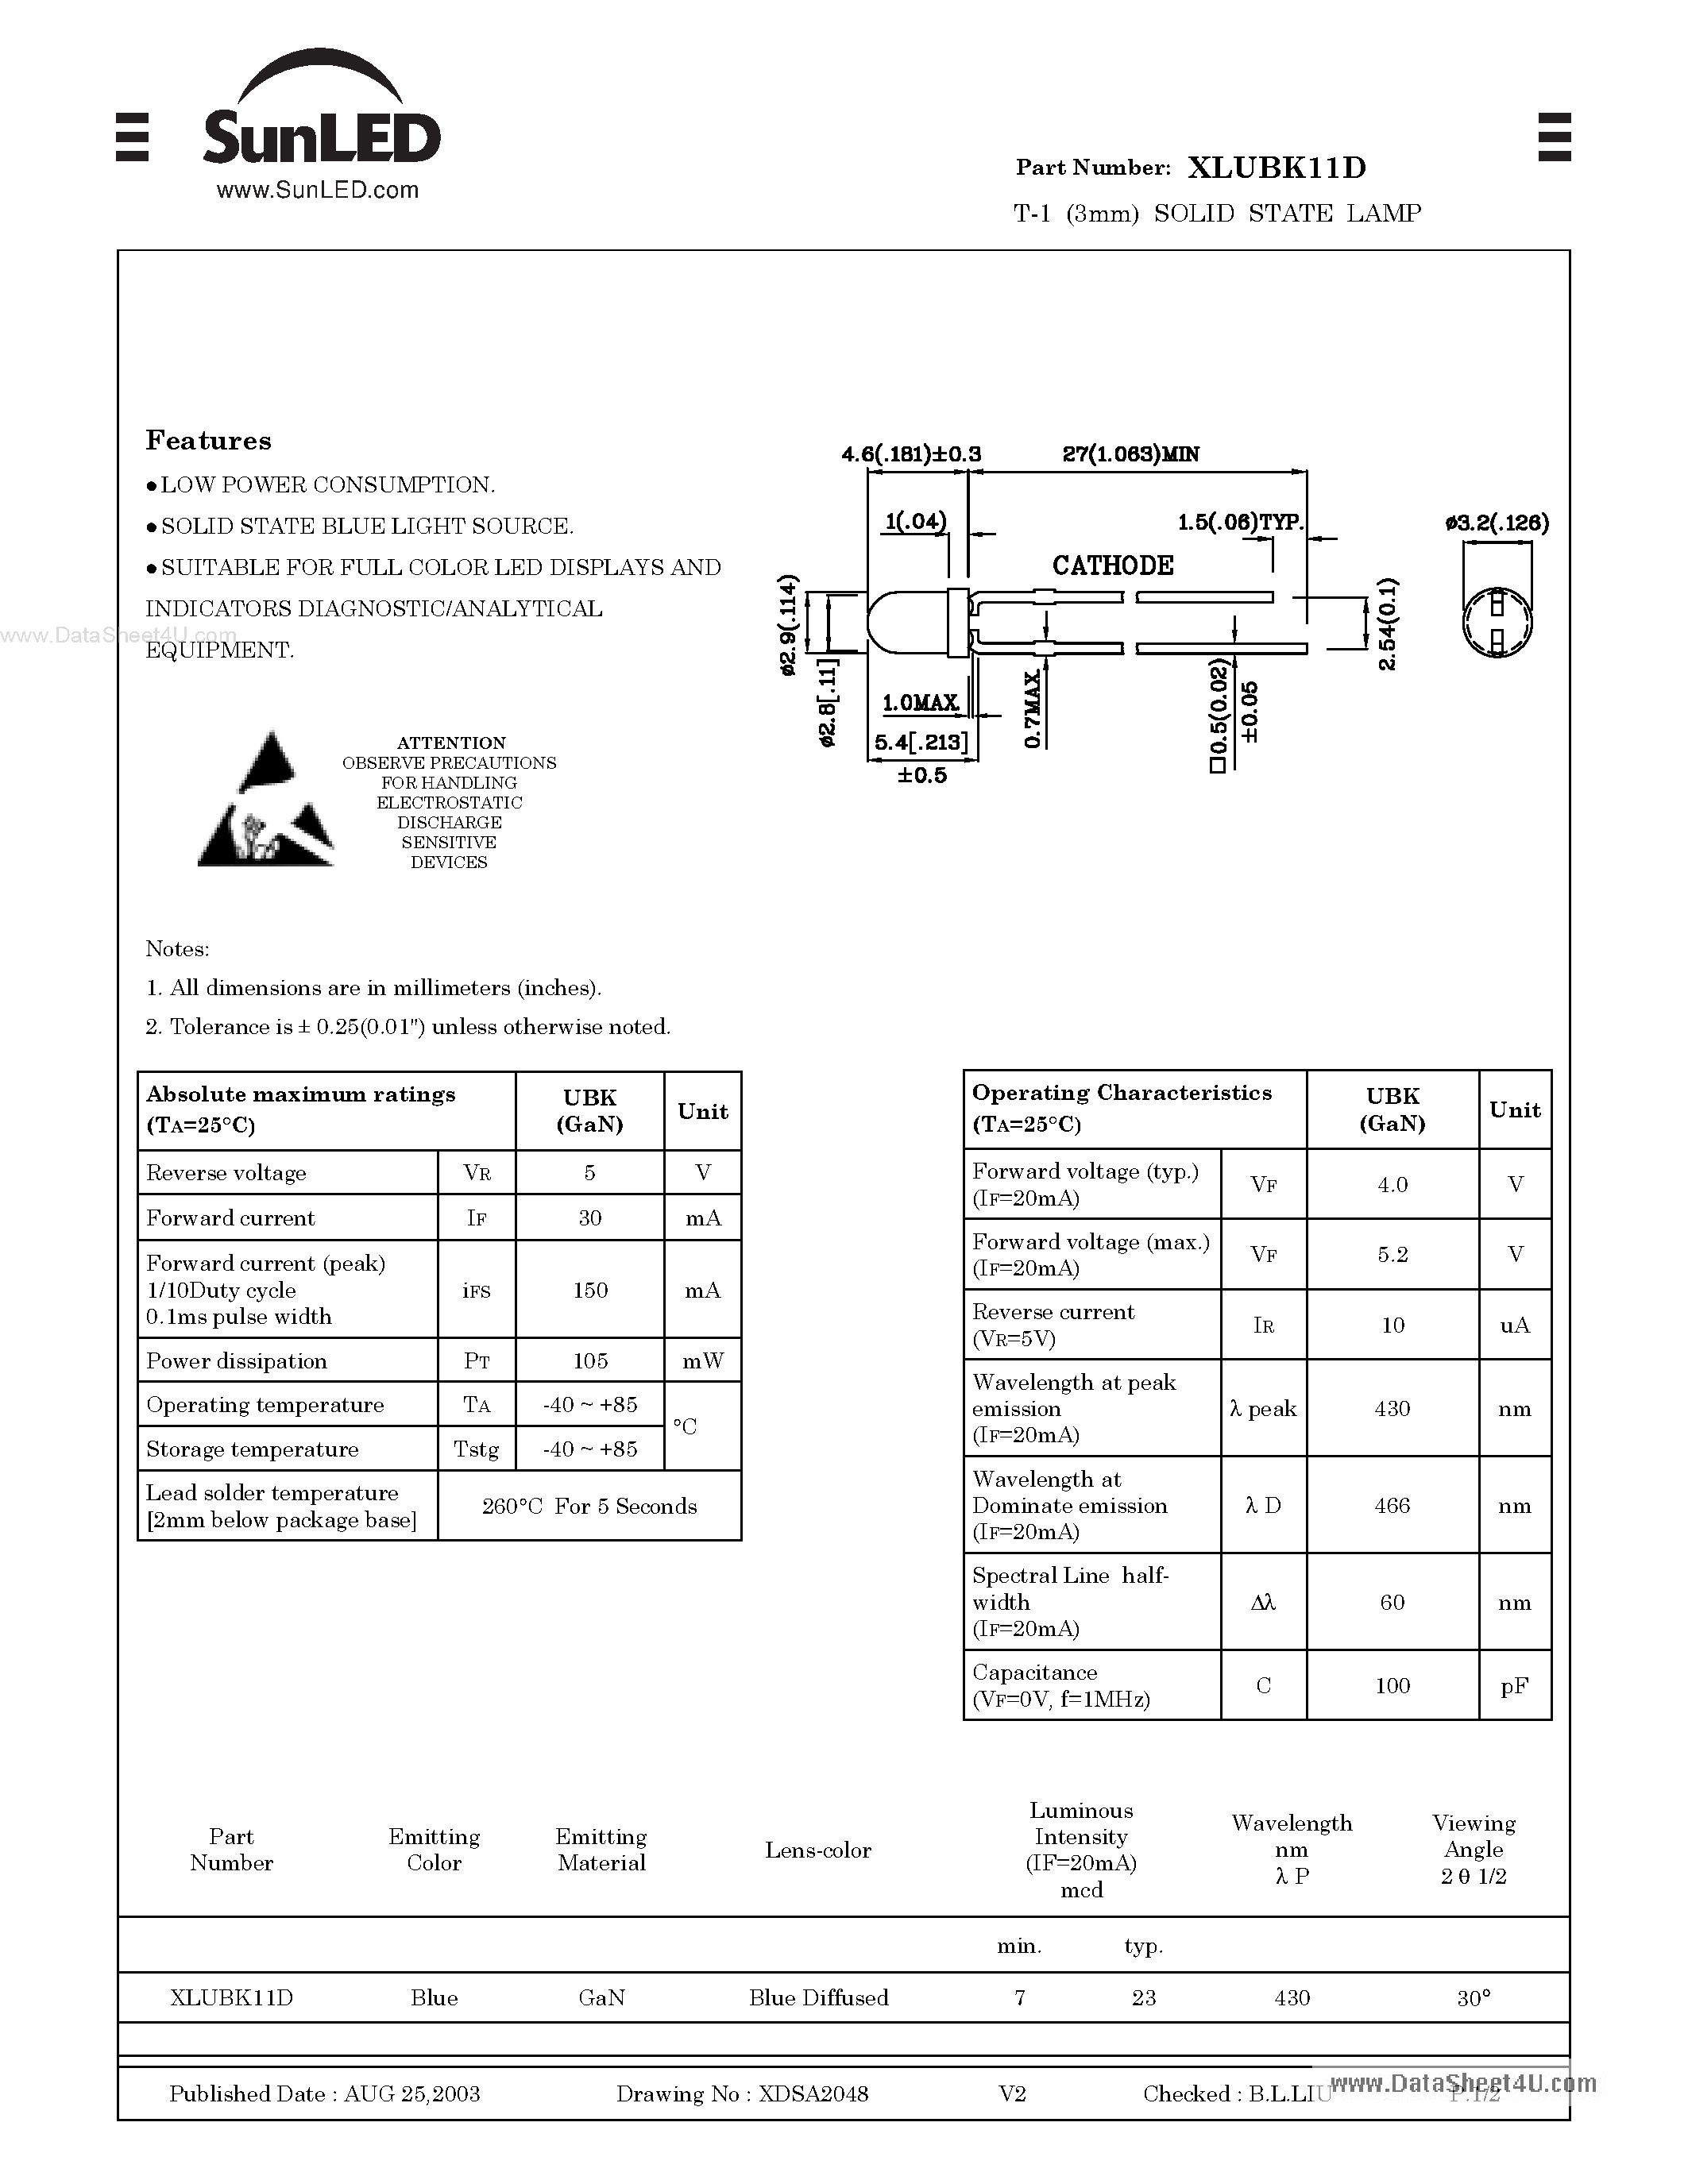 Datasheet XLUBK11D - T-1 (3mm) SOLID STATE LAMP page 1